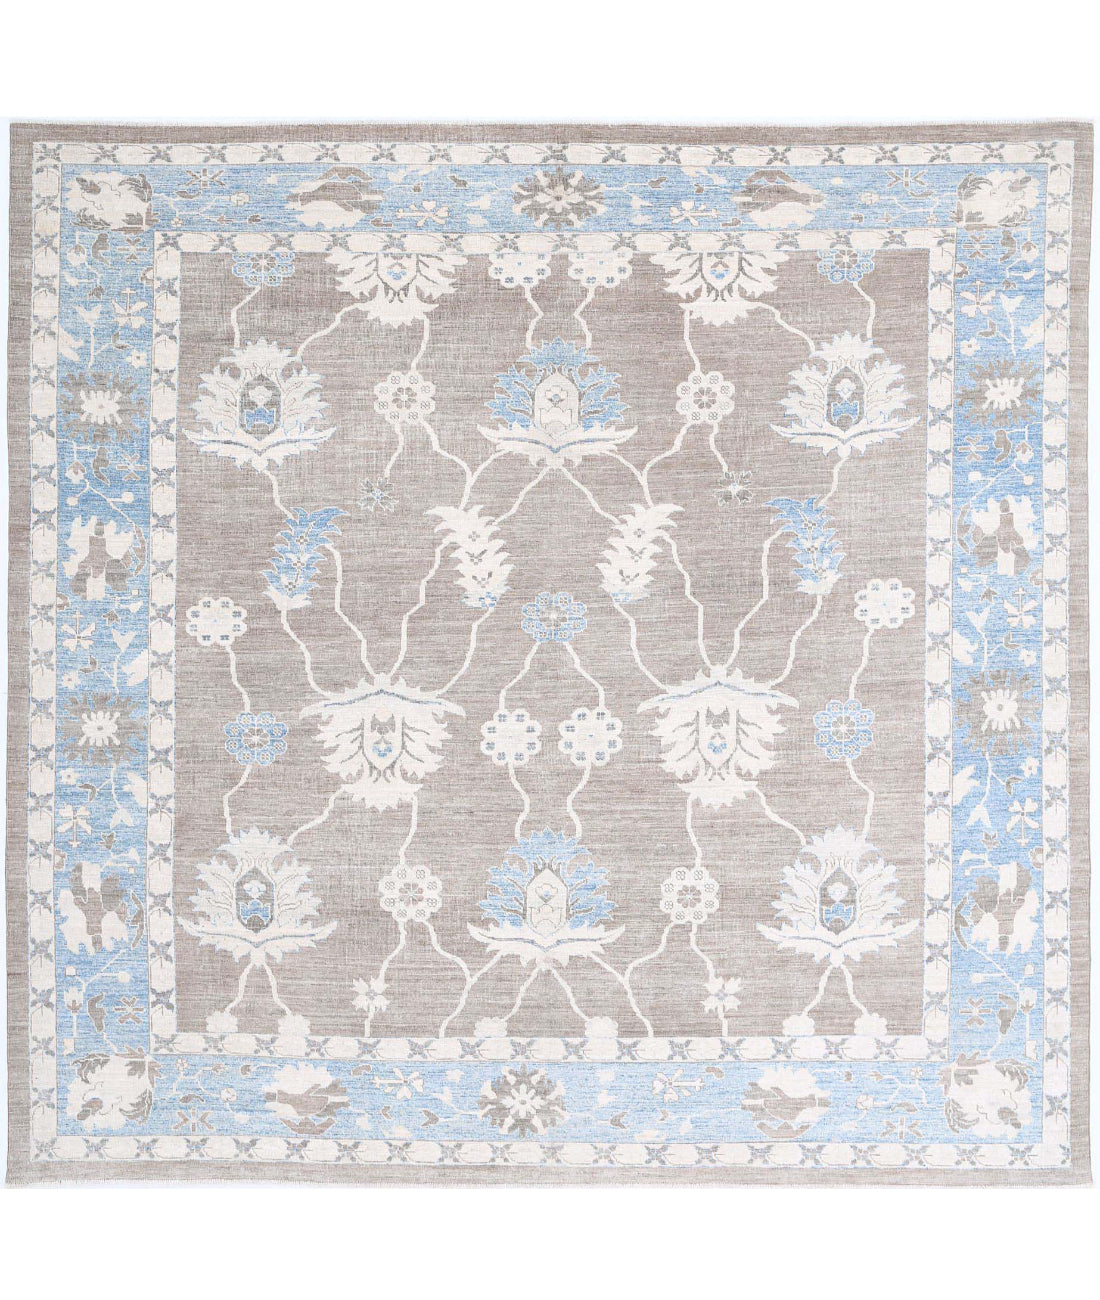 hand-knotted-oushak-wool-rug-5013248.jpg